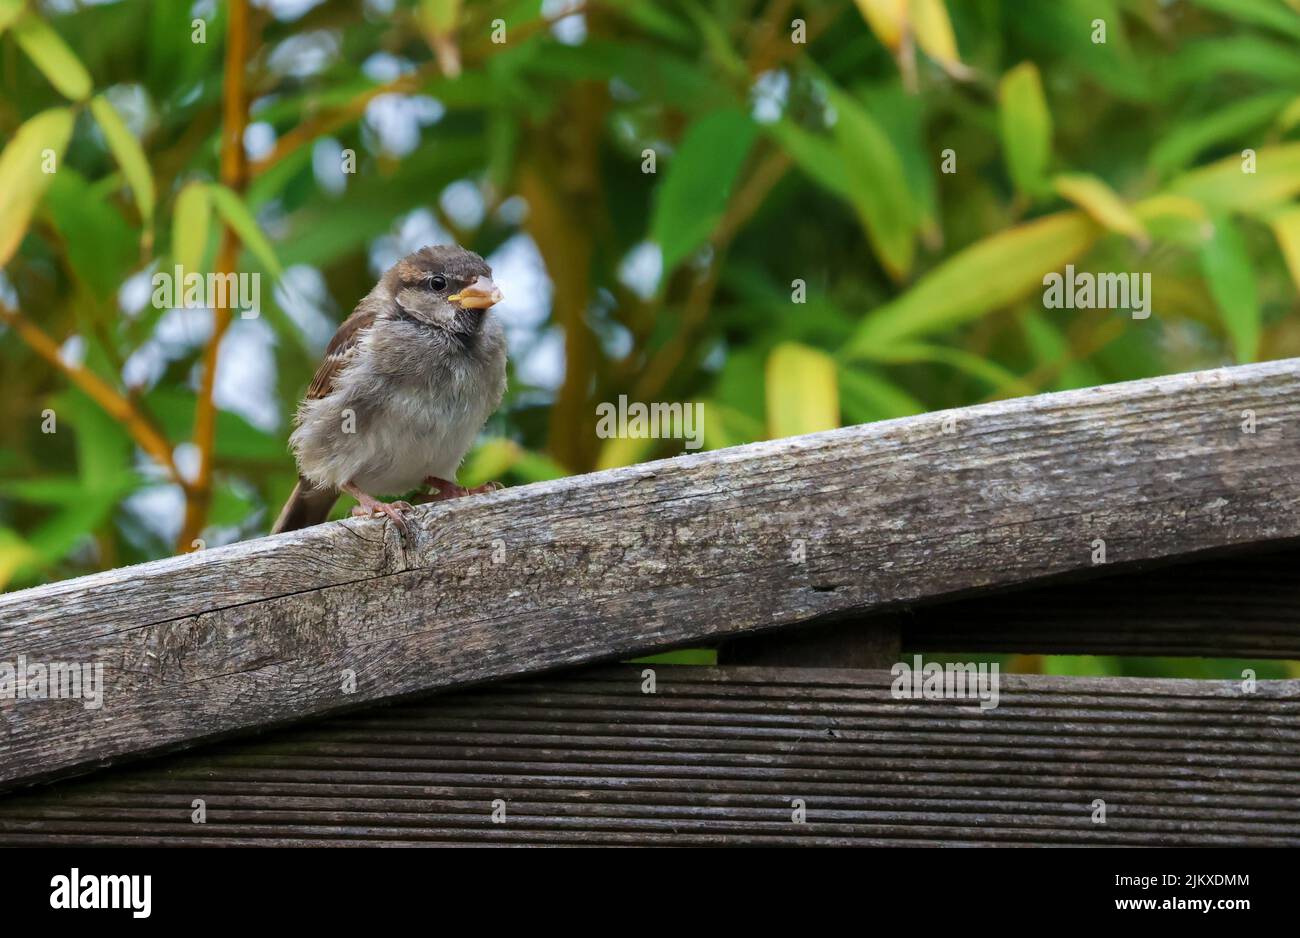 House sparrow chick stands on garden fence with green leaf background. 'Passer domesticus' baby bird with fluffy feathers. Dublin, Ireland Stock Photo